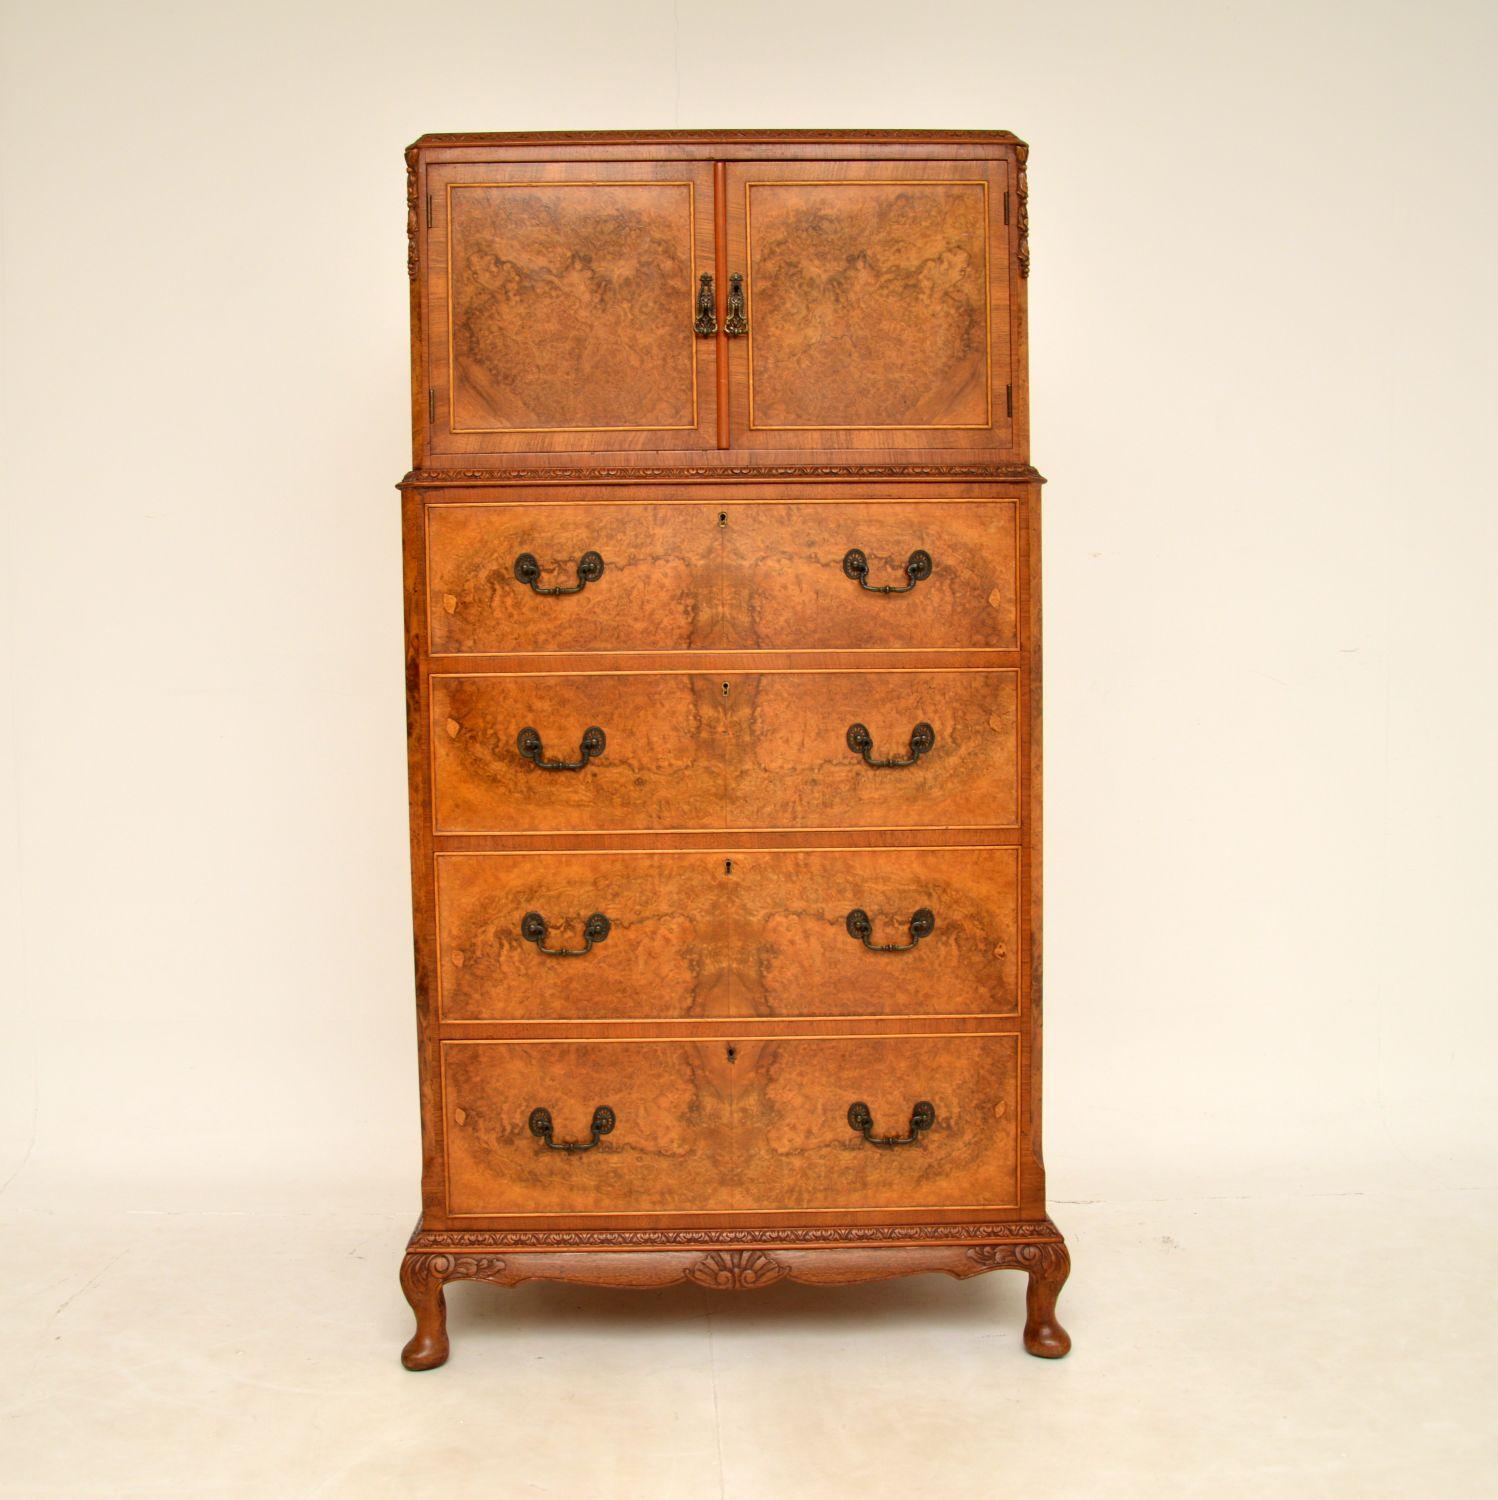 A large and very beautiful antique walnut tallboy cabinet on chest. This was made in England & dates from around the 1920-1930’s period.

It is of superb quality, with gorgeous burr walnut veneers on the front, and crisp carving around the edges